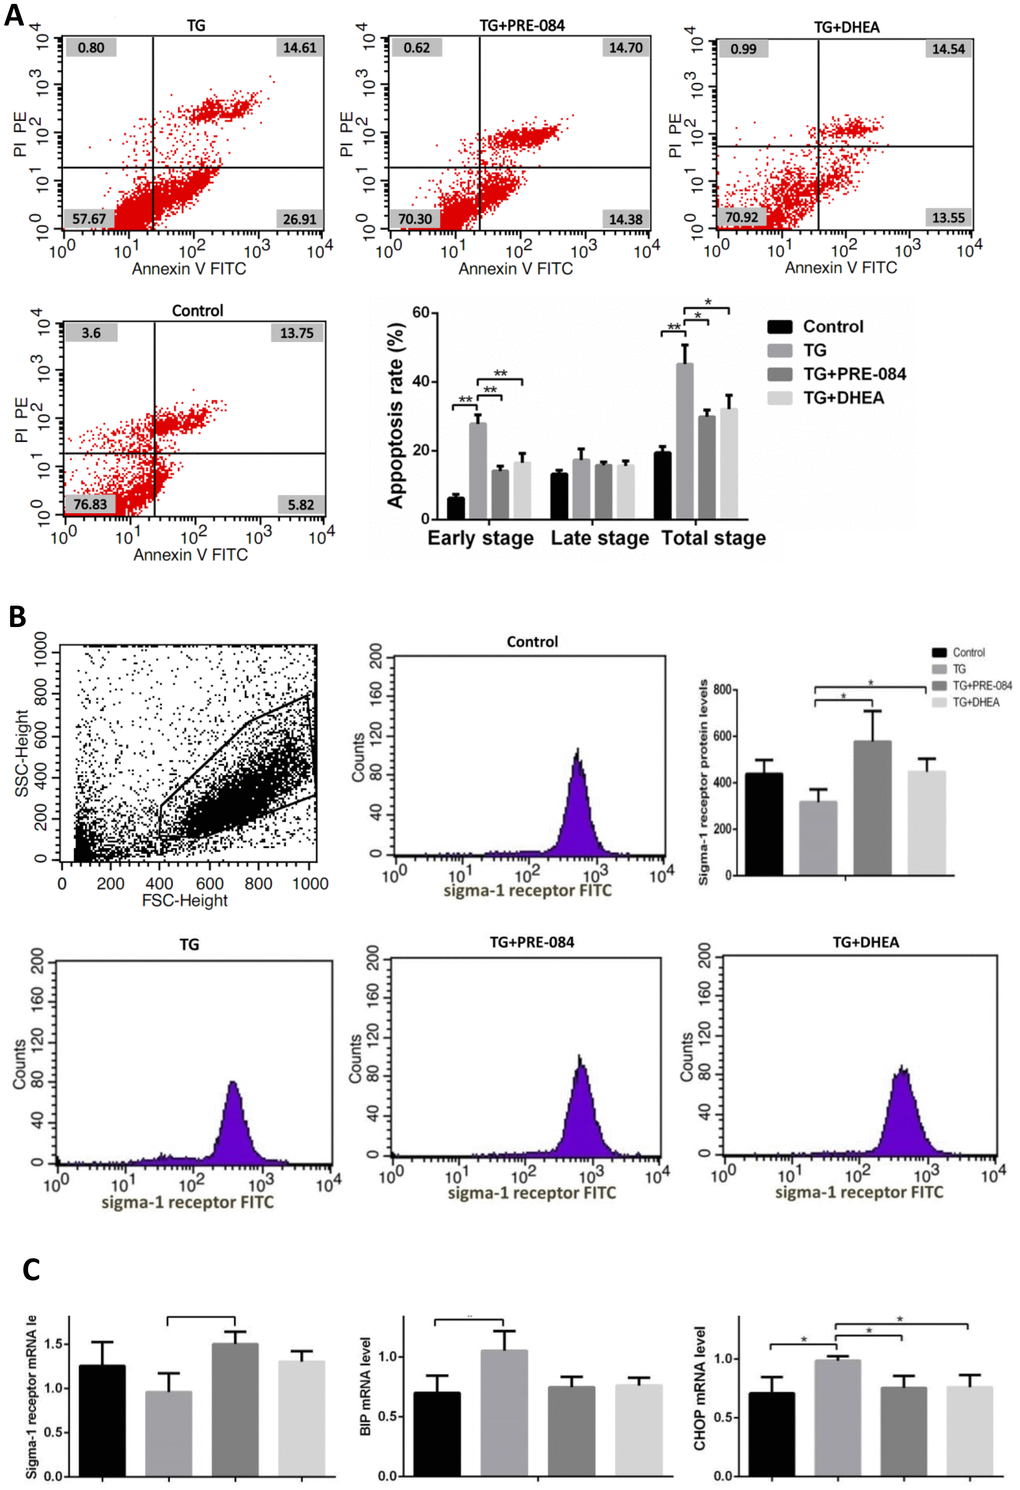 The decrease of apoptosis rates in thapsigargin(TG)-induced ERS KGN cells treated with PRE-084/DHEA was accompanied by the decrease of ERS-related and apoptosis-related gene expression. (A) Apoptosis index in KGN cells treated with different drugs. (B) Flow cytometry sorting of sigma-1 receptor protein in KGN cells treated with different drugs.